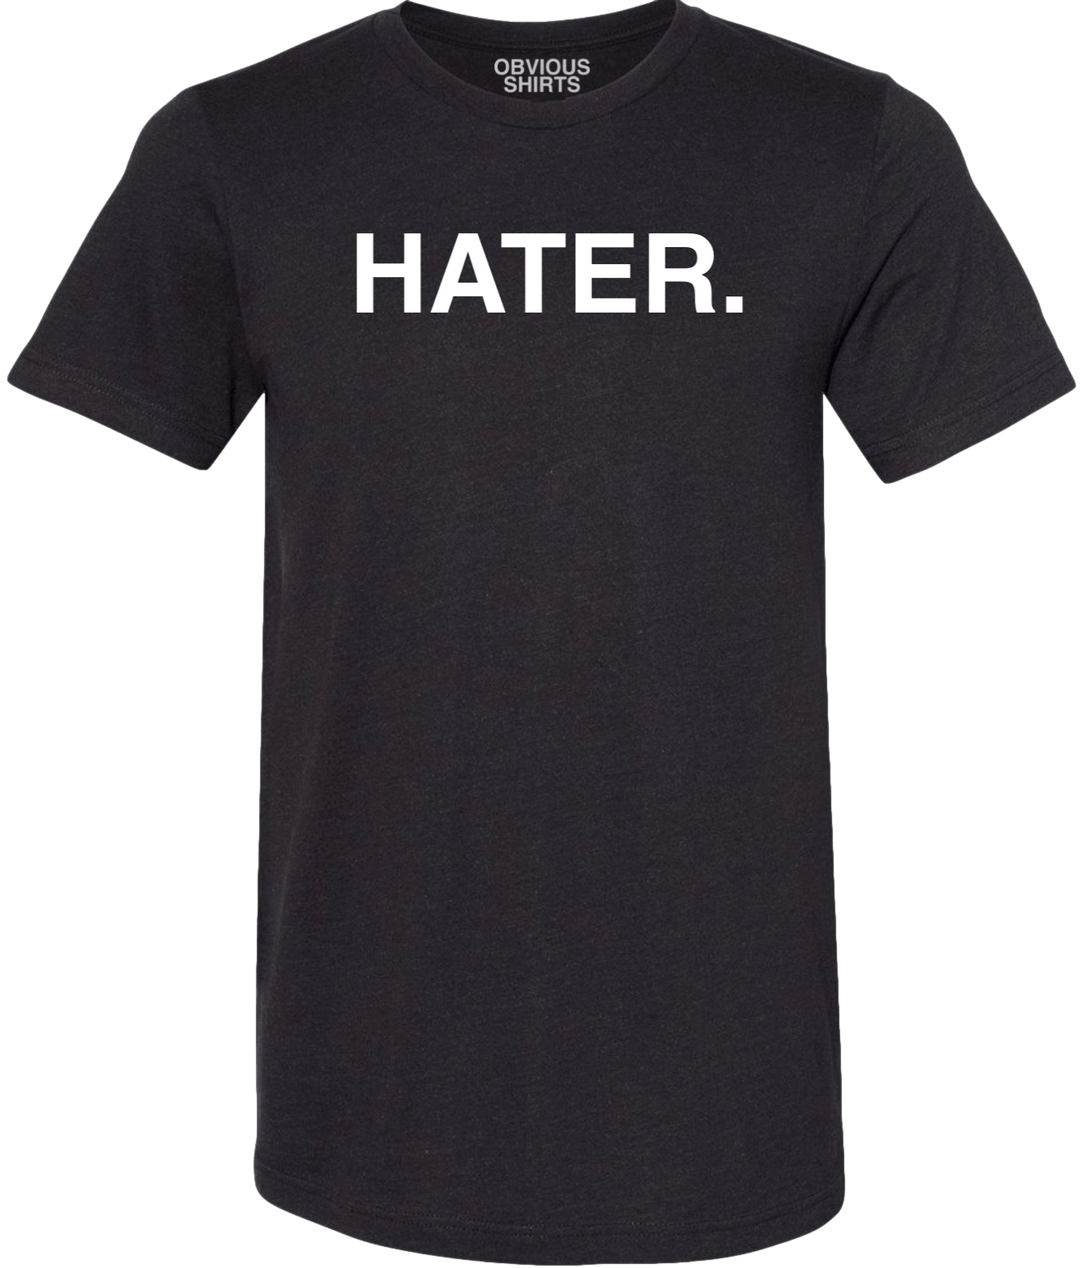 HATER. - OBVIOUS SHIRTS